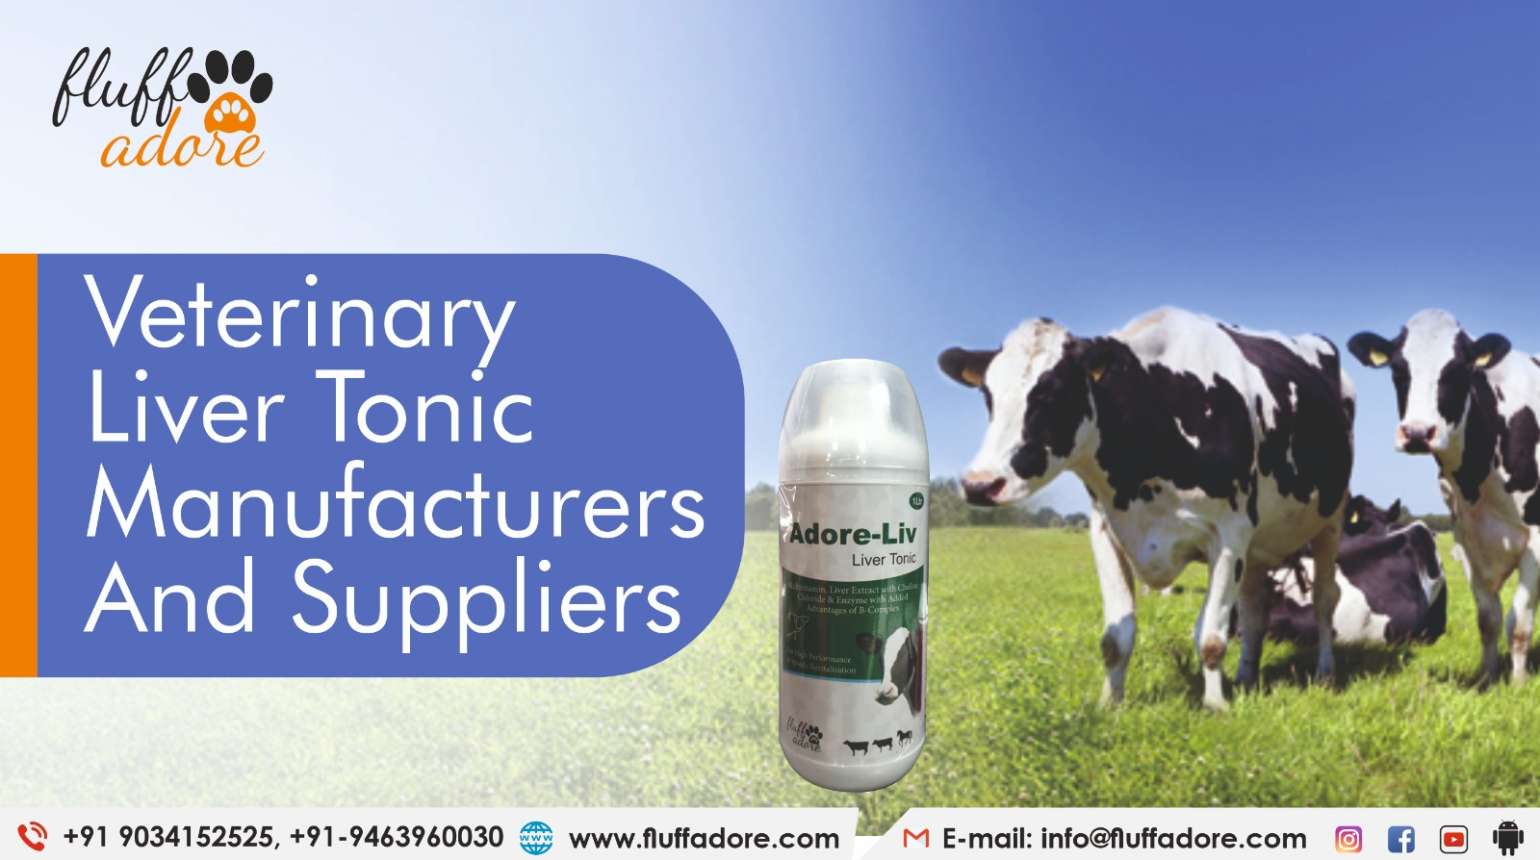 Veterinary Liver Tonic Manufacturers and Suppliers